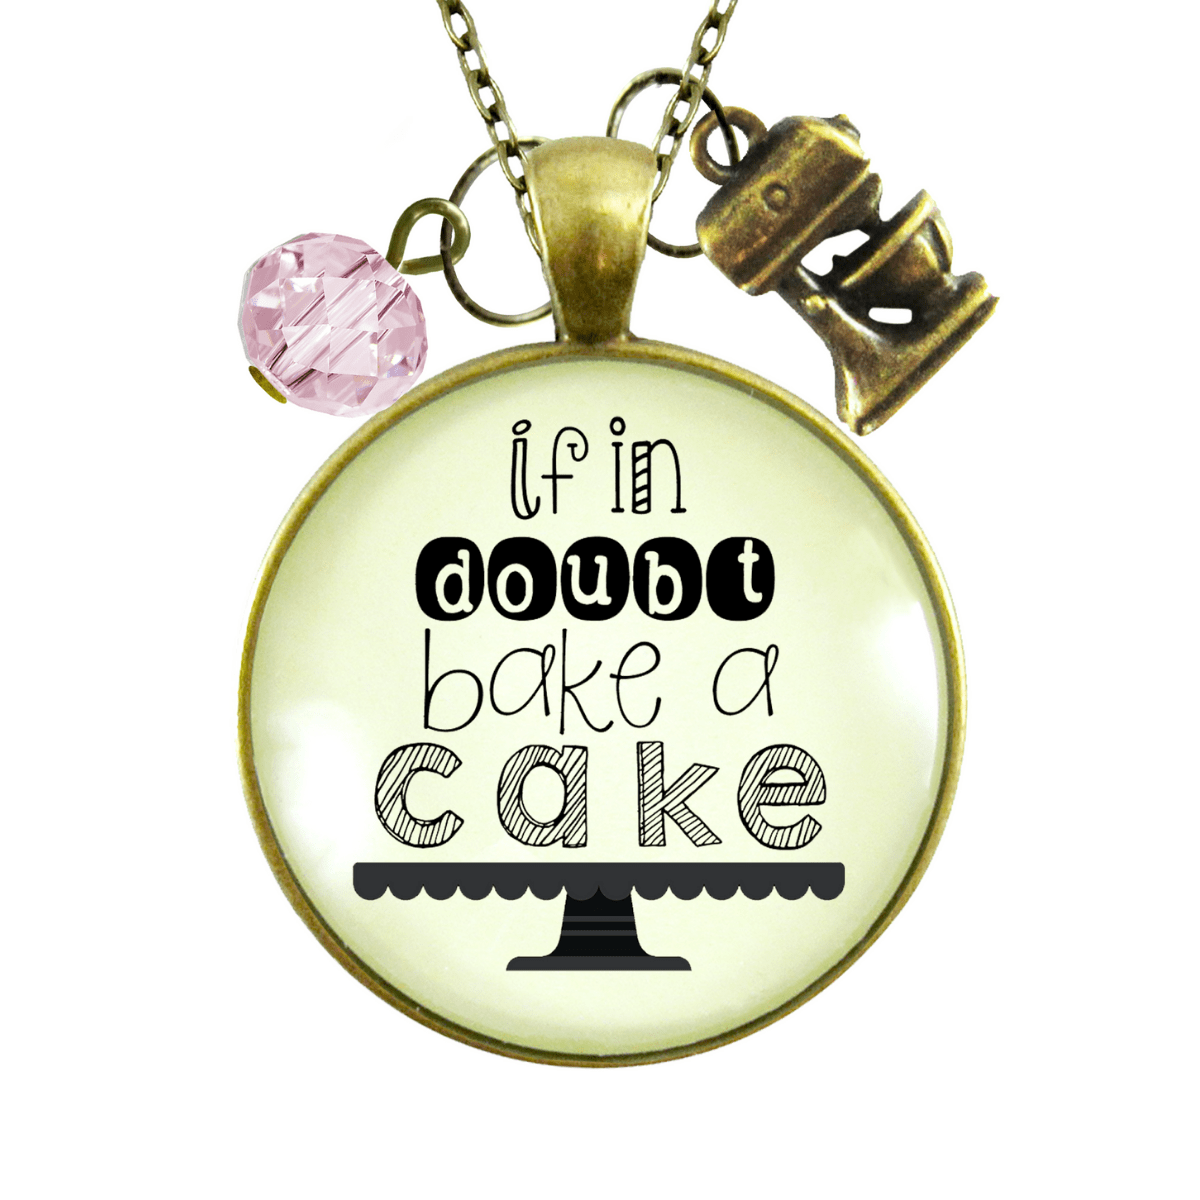 Gutsy Goodness Baker Necklace If in Doubt Make Cake Pastry Foodie Lover Womens Gift Jewelry - Gutsy Goodness;Baker Necklace If In Doubt Make Cake Pastry Foodie Lover Womens Gift Jewelry - Gutsy Goodness Handmade Jewelry Gifts